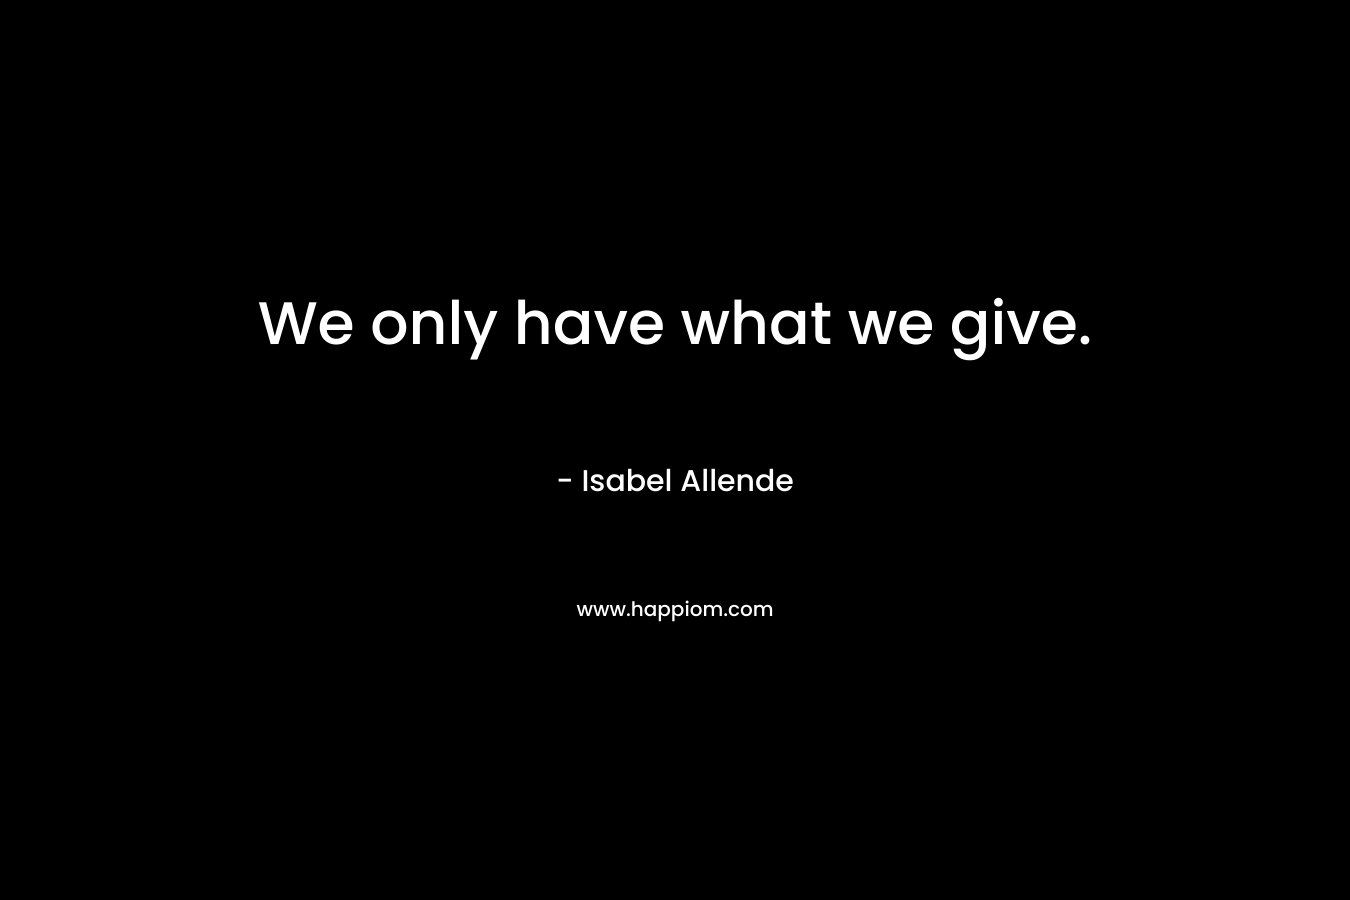 We only have what we give. – Isabel Allende